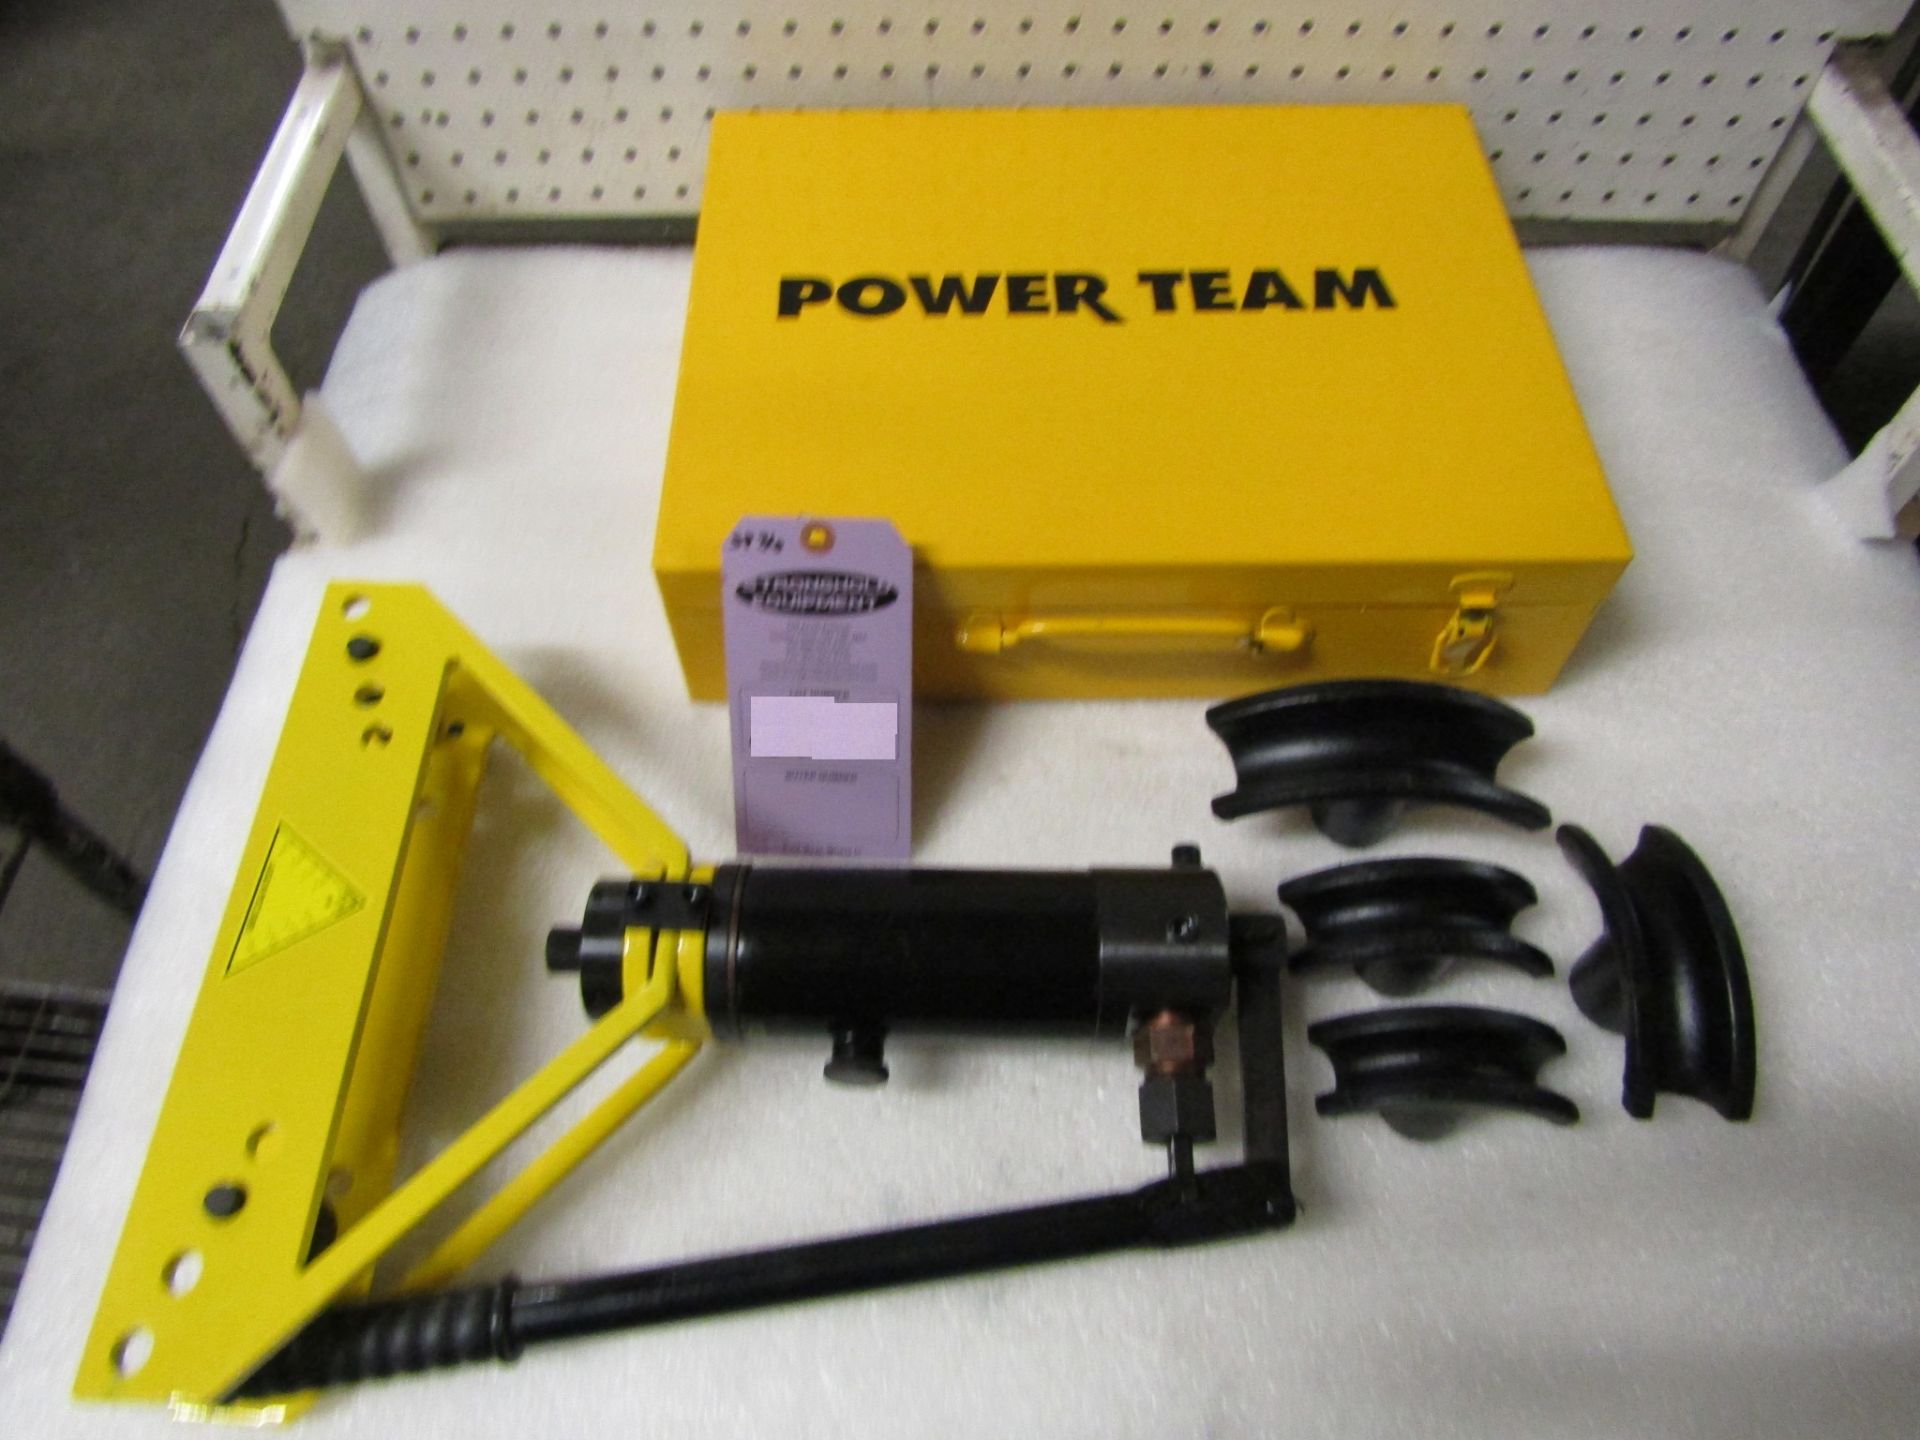 Power Team Hydraulics style tube Bender unit up to 1" capacity including dies in case - MINT, UNUSED - Image 2 of 2